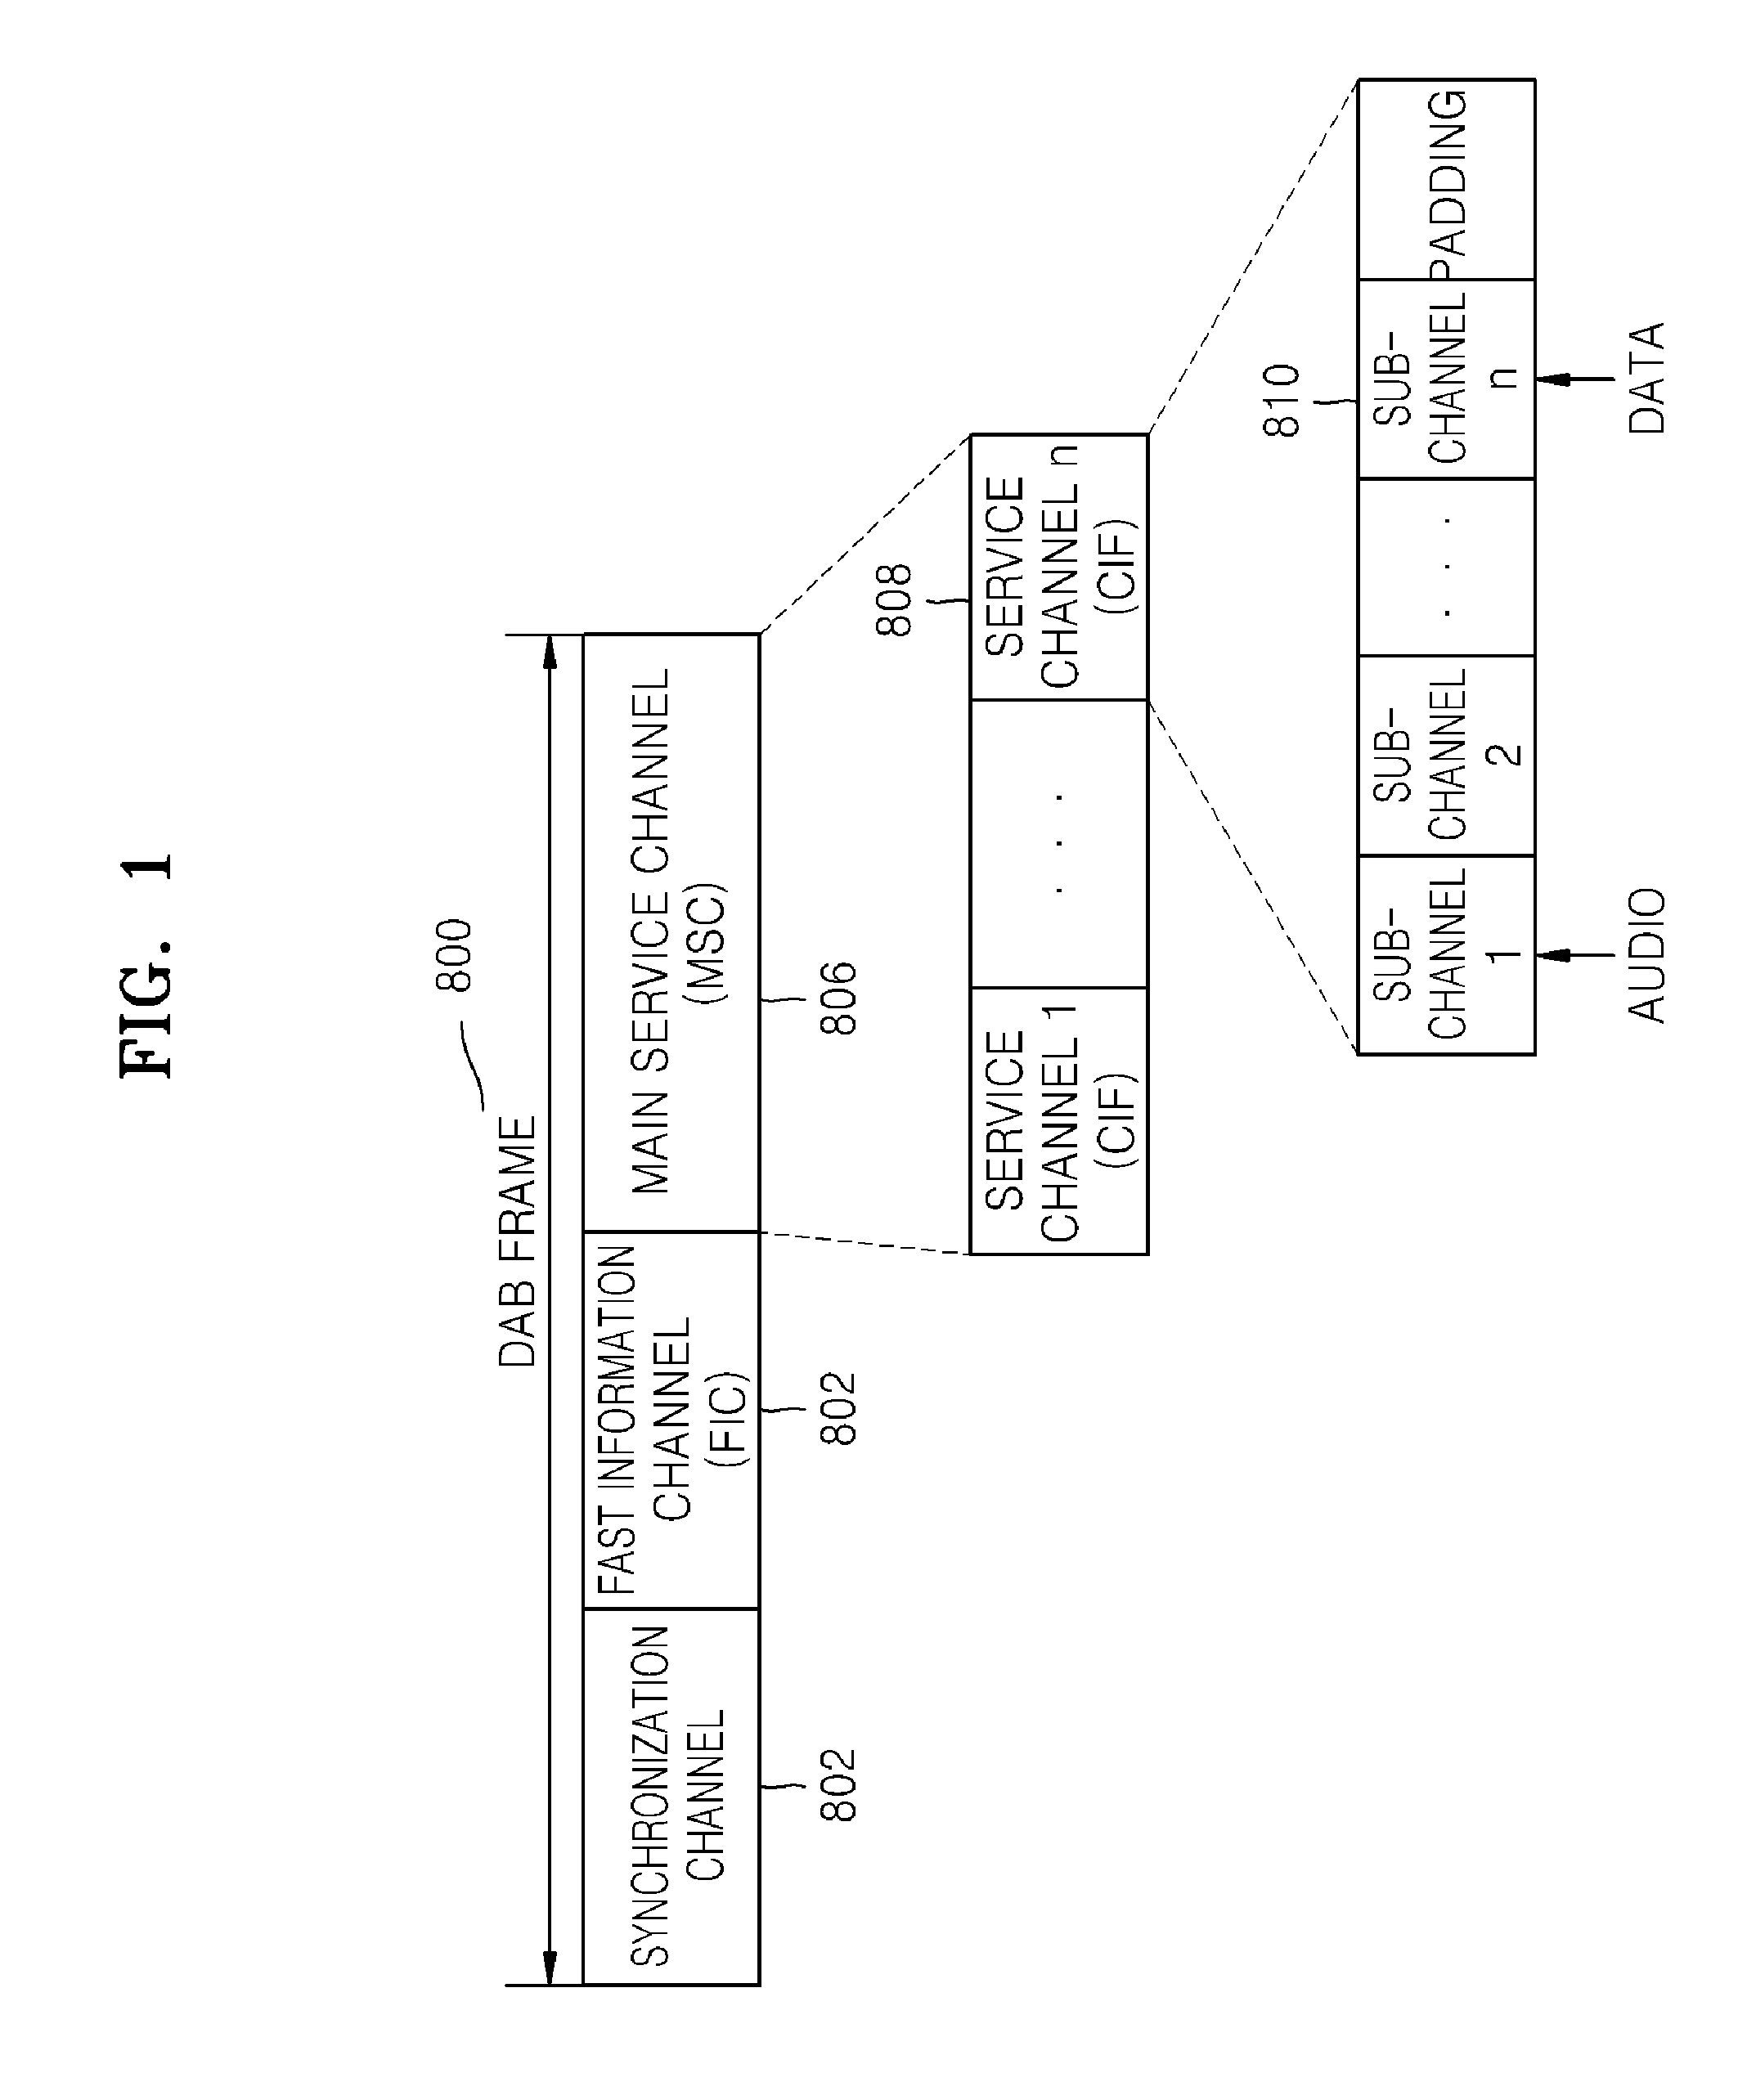 Method and Apparatus For Providing Ip Datacasting Service in Digital Audio Broadcasting System